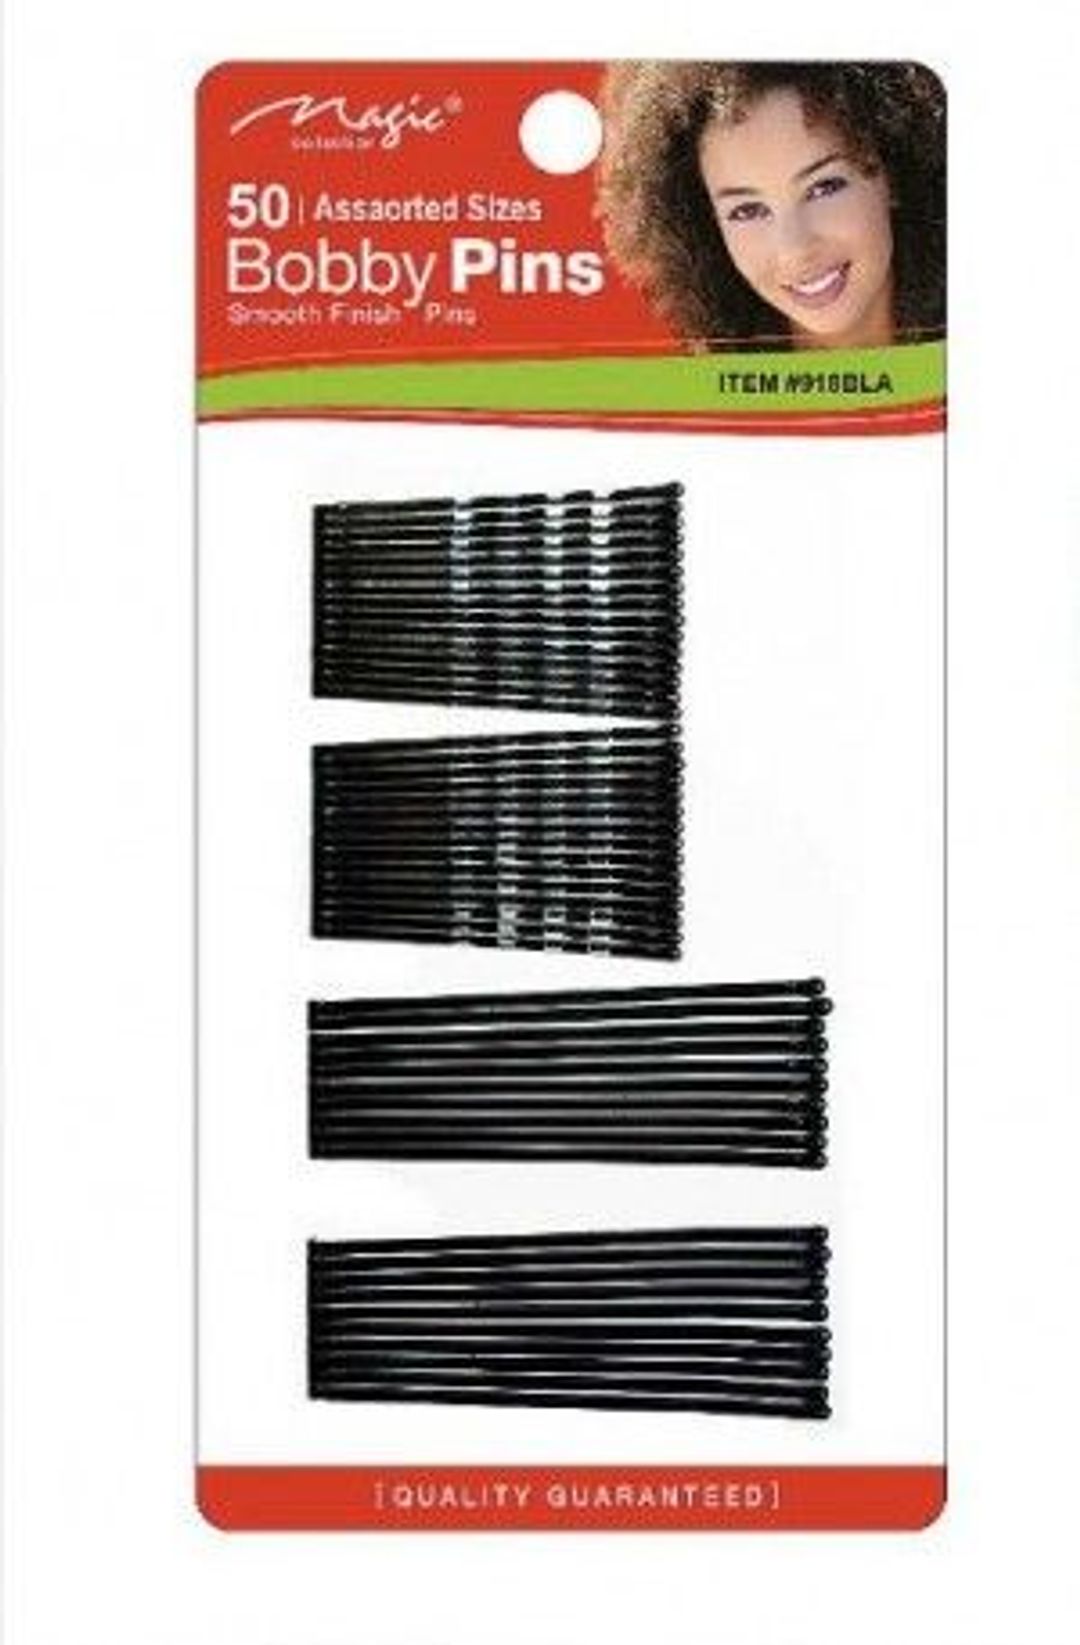 Magic Collection 50 Assorted Size Bobby Pins - 918blk